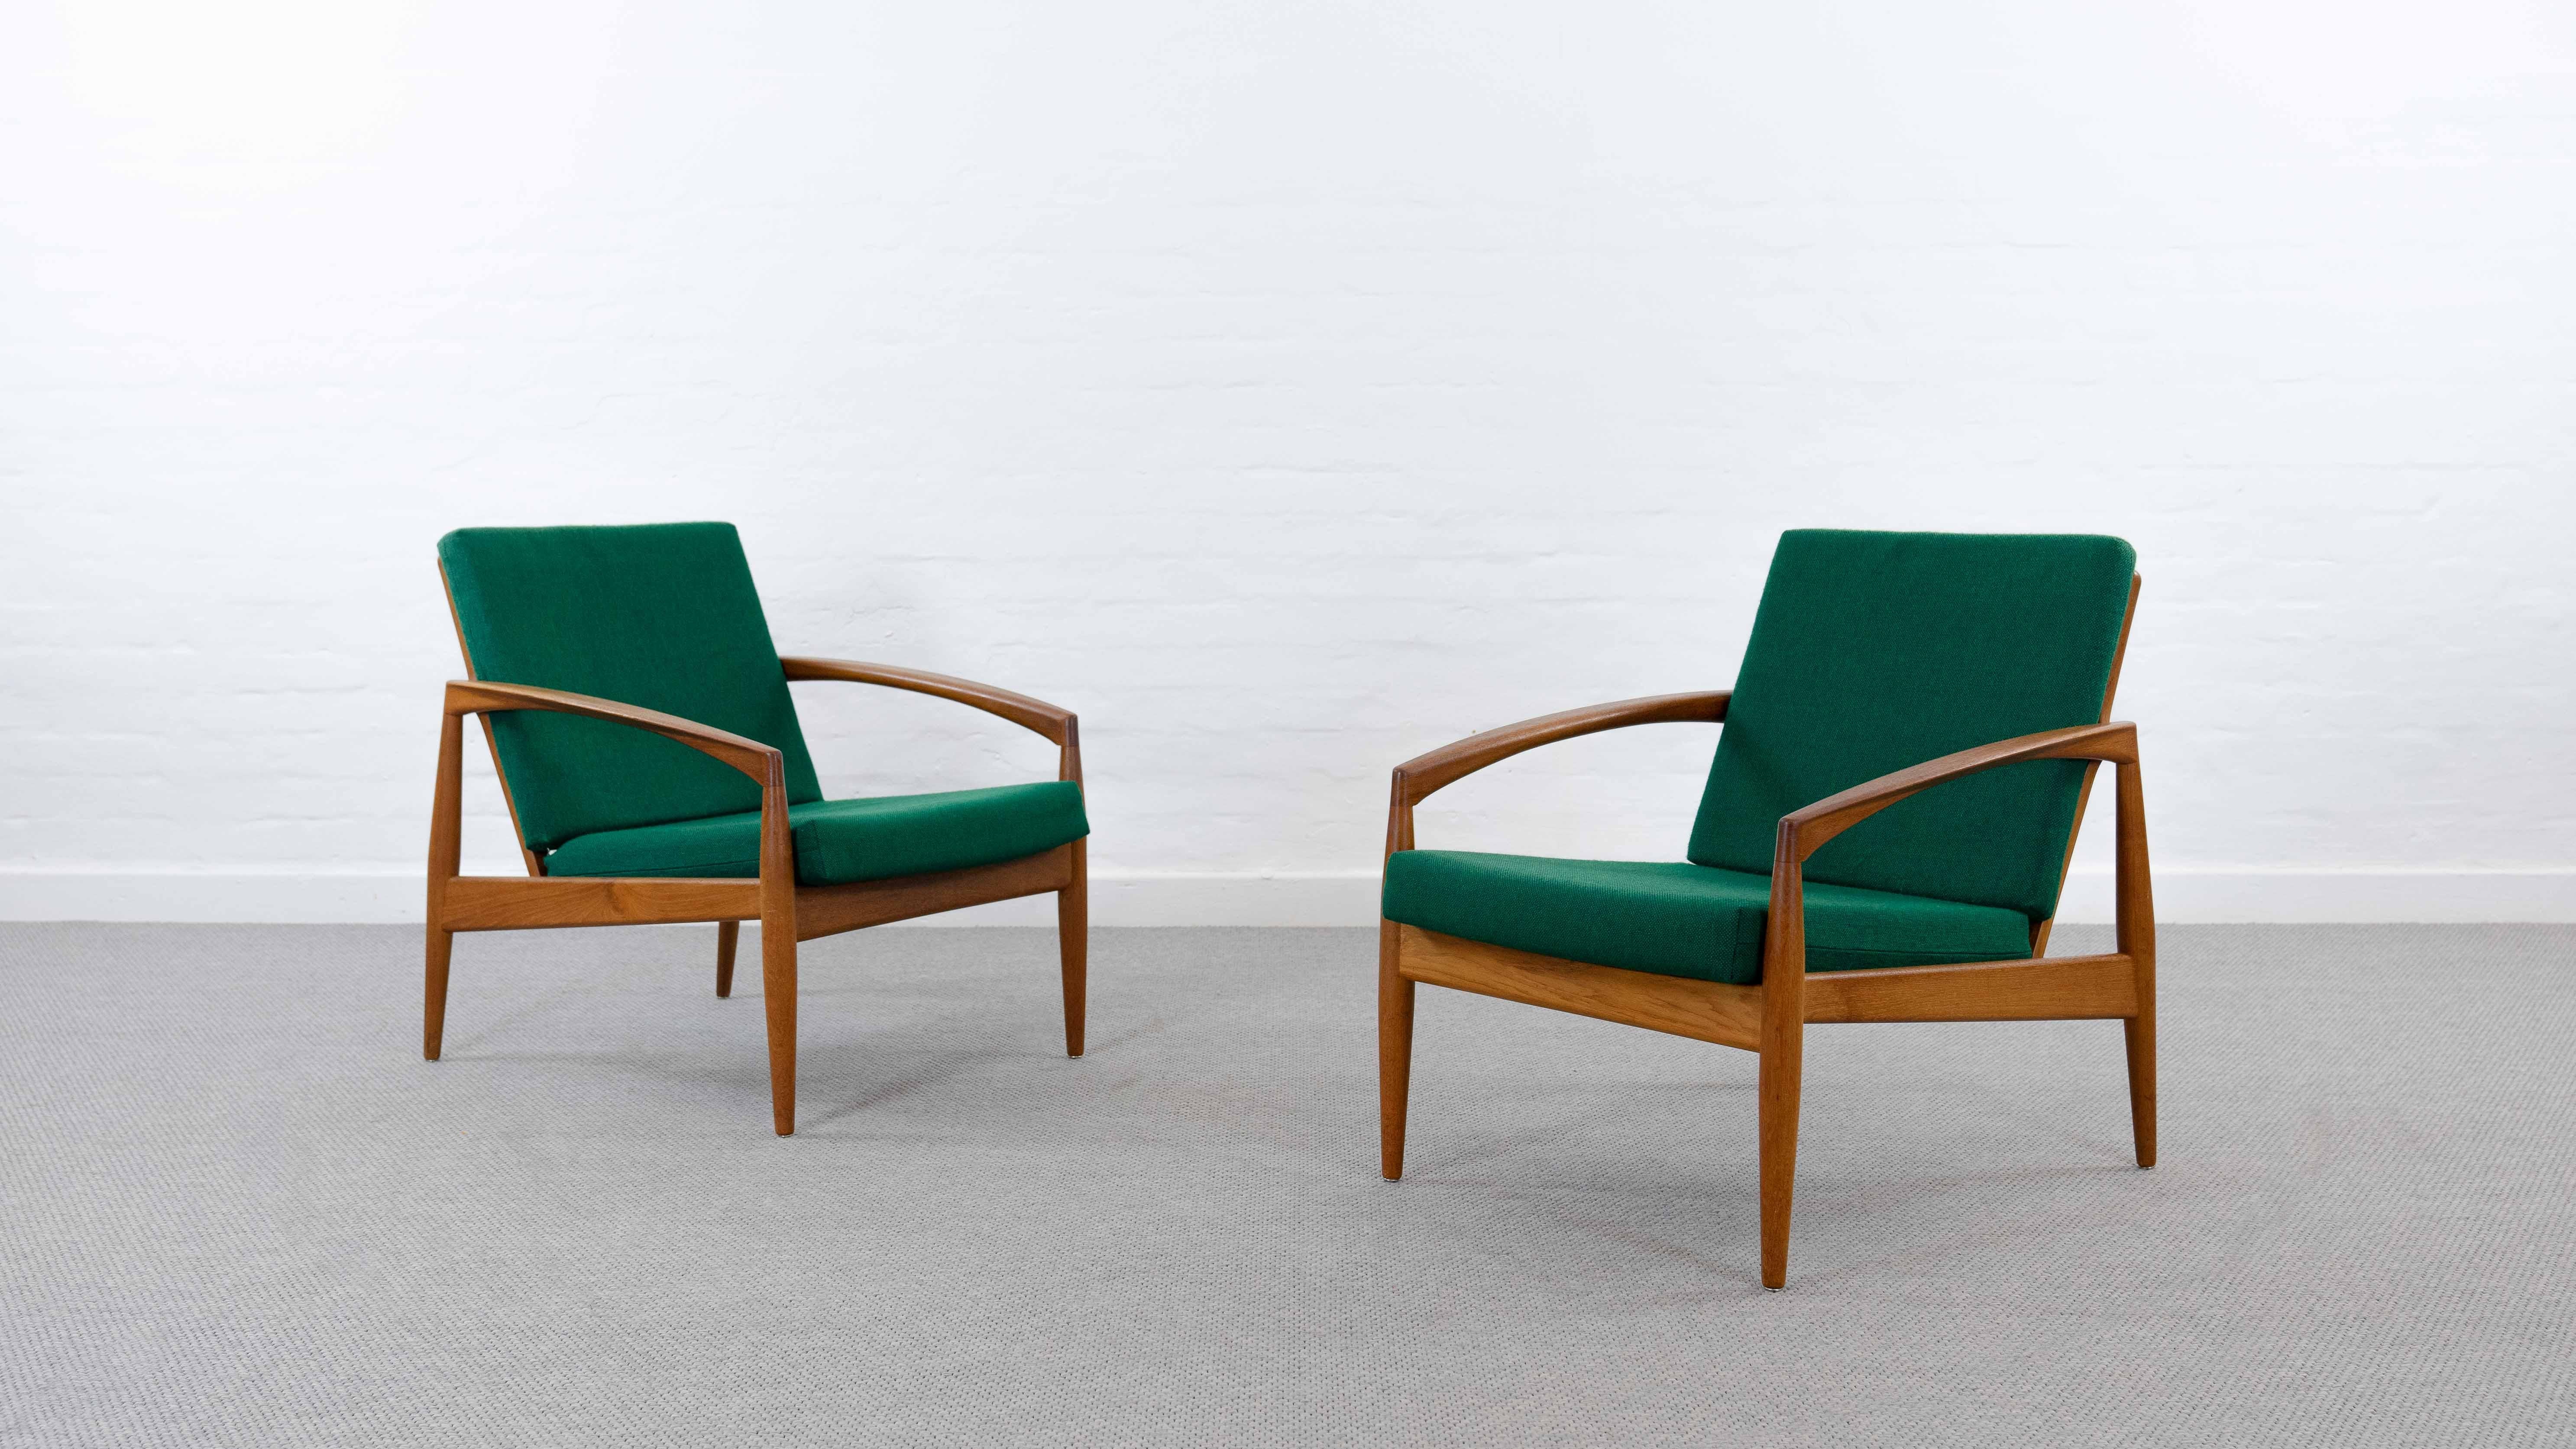 Pair of Danish armchairs, designed 1955 by Kai Kristiansen for Magnus Olesen. Model Nr. 121. So called „Paper Knive Chairs“. Executed in Teakwood with original green fabrics. Both chairs with manufacturers label.